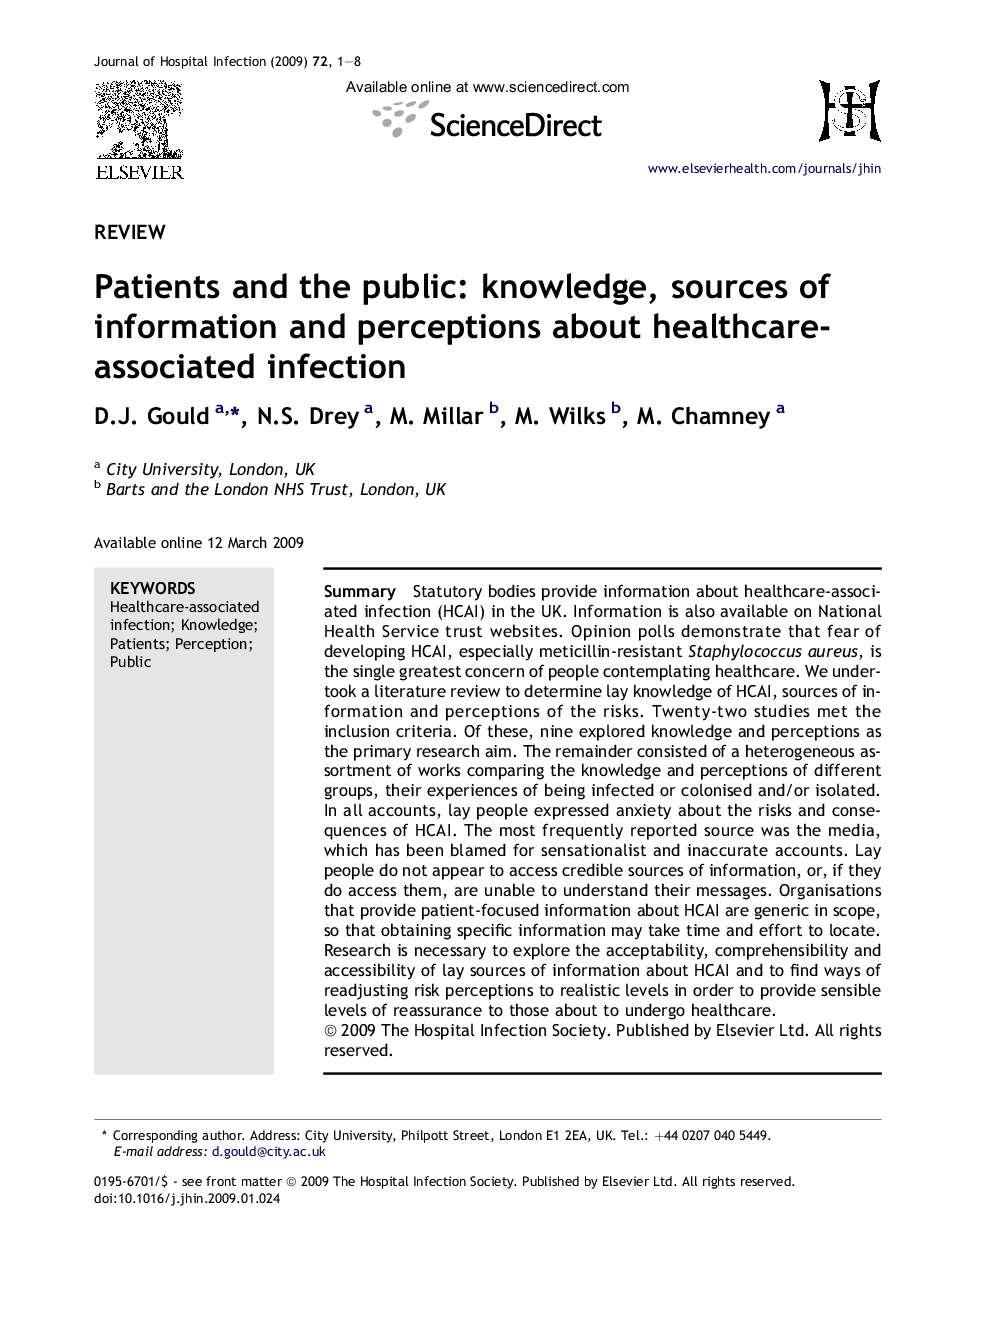 Patients and the public: knowledge, sources of information and perceptions about healthcare-associated infection